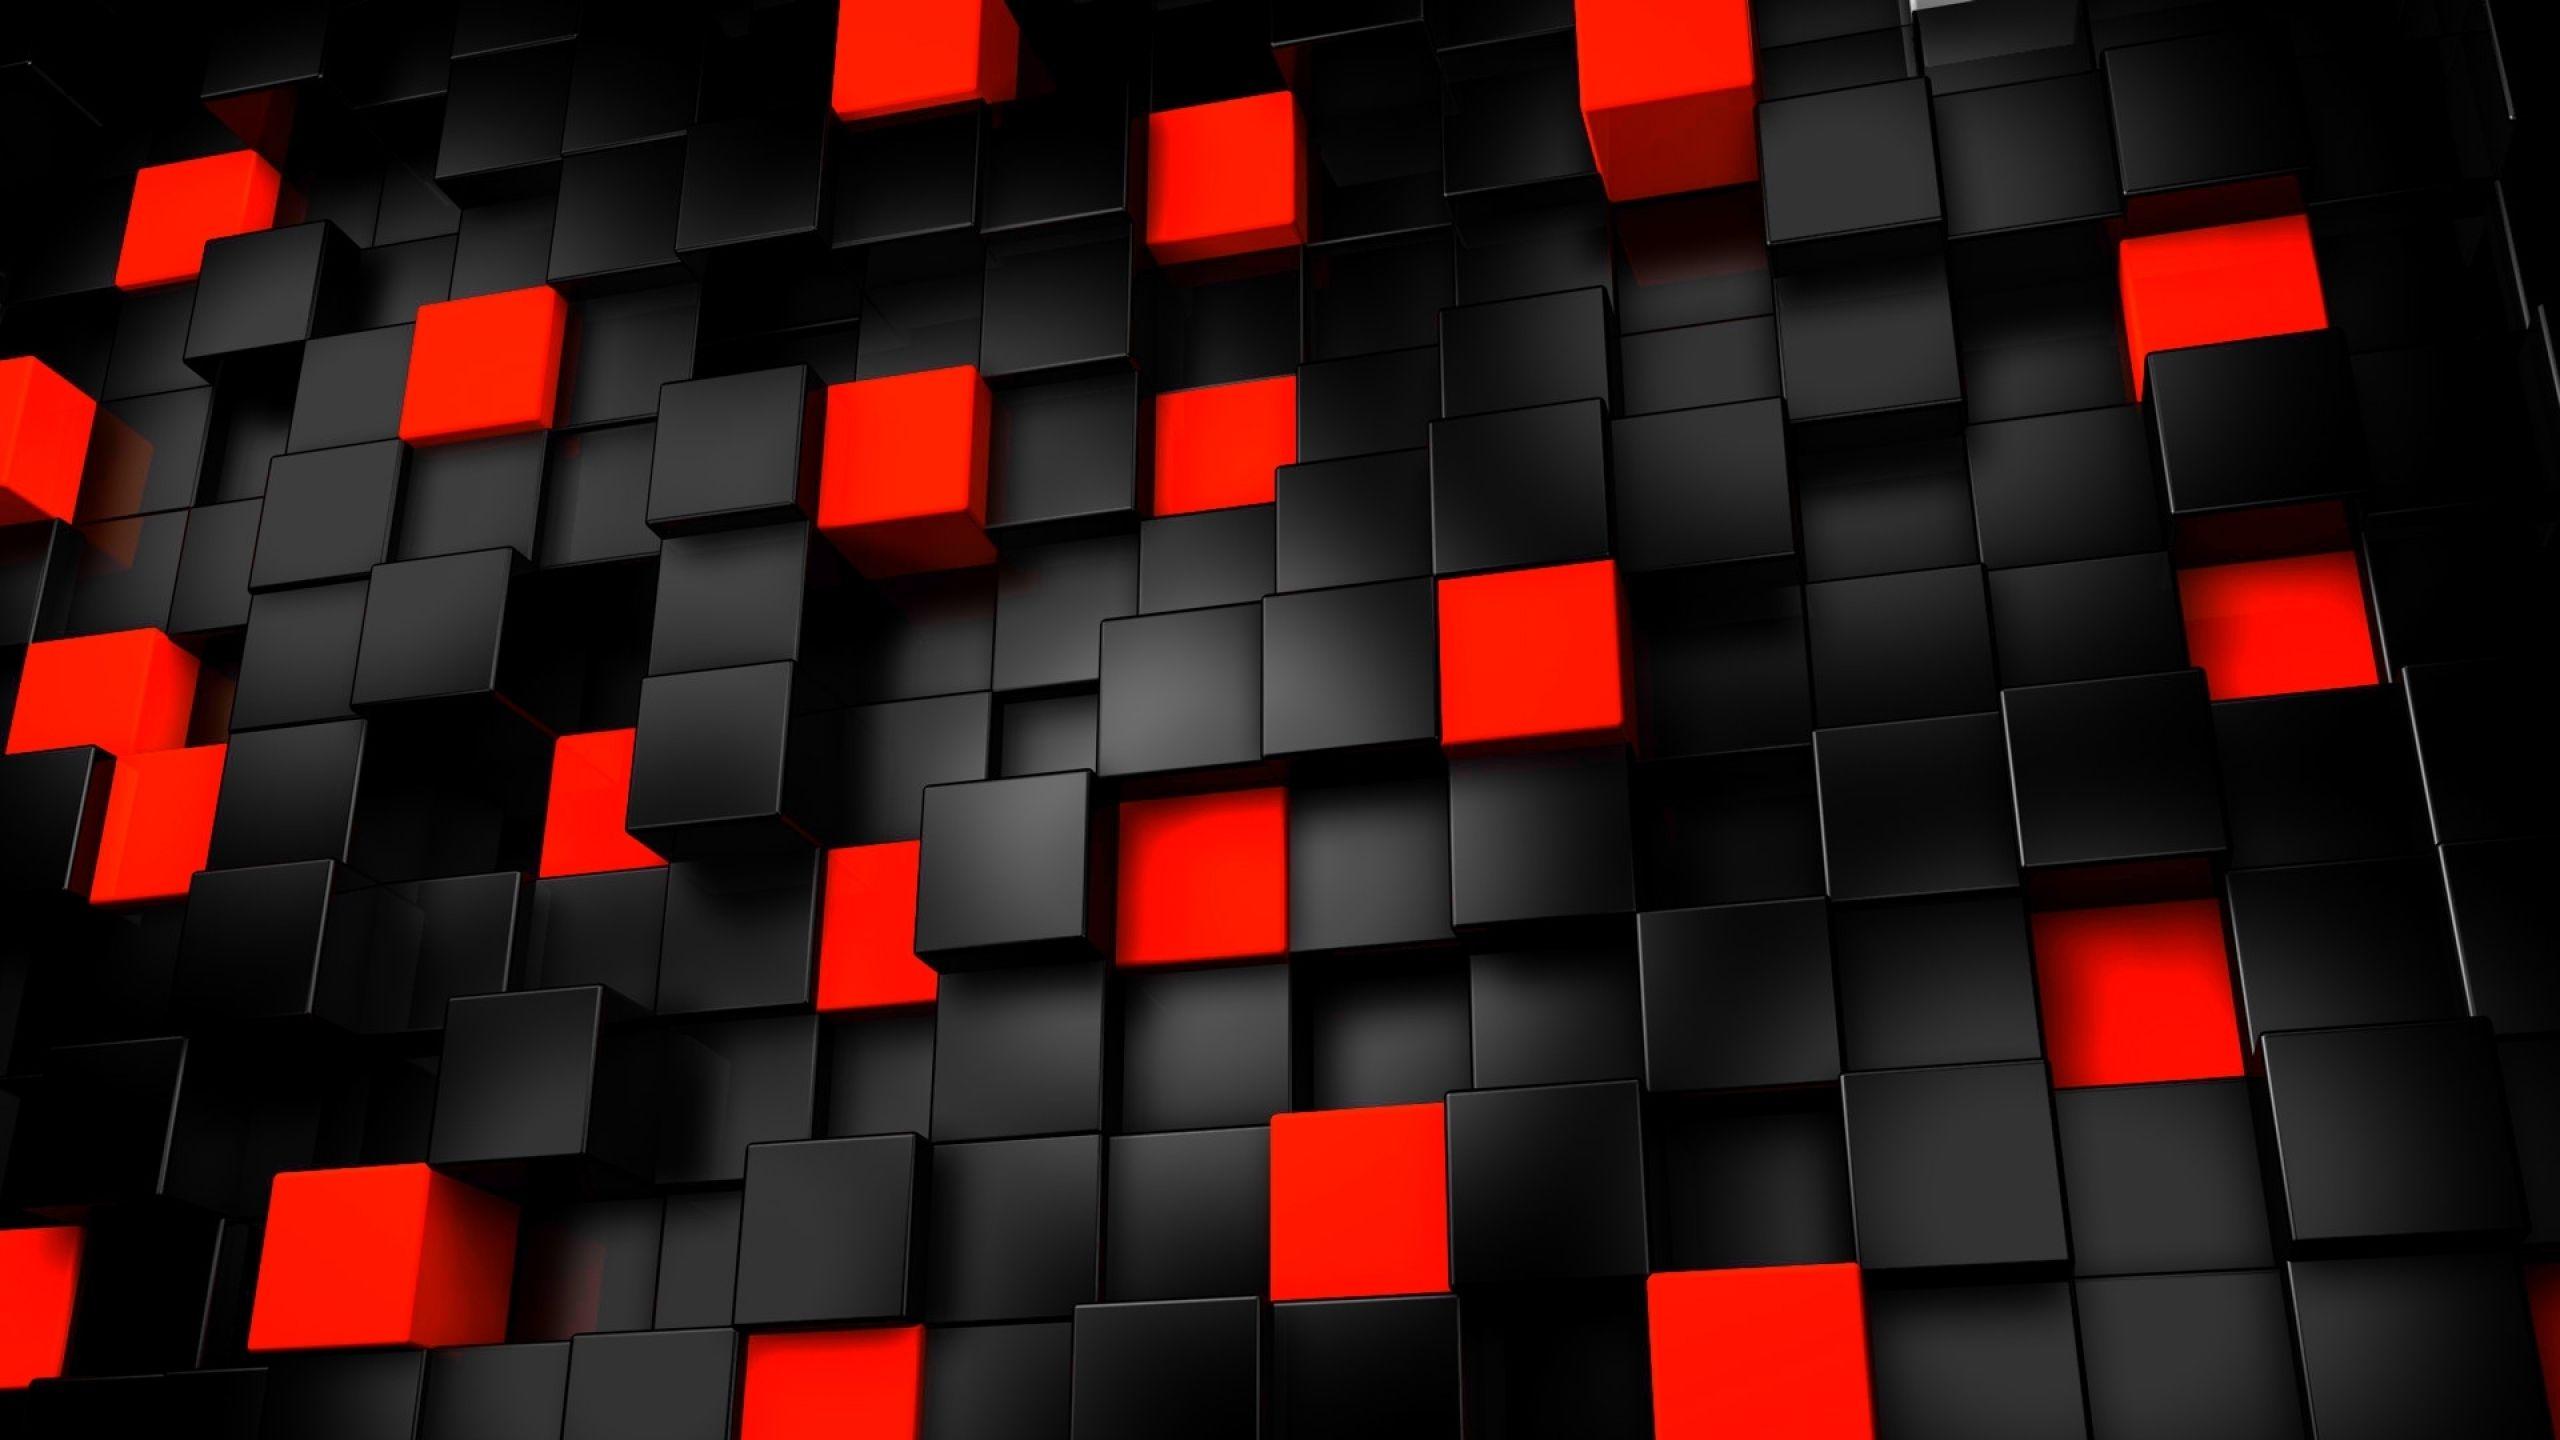 3d Wallpaper Black And Red Image Num 3